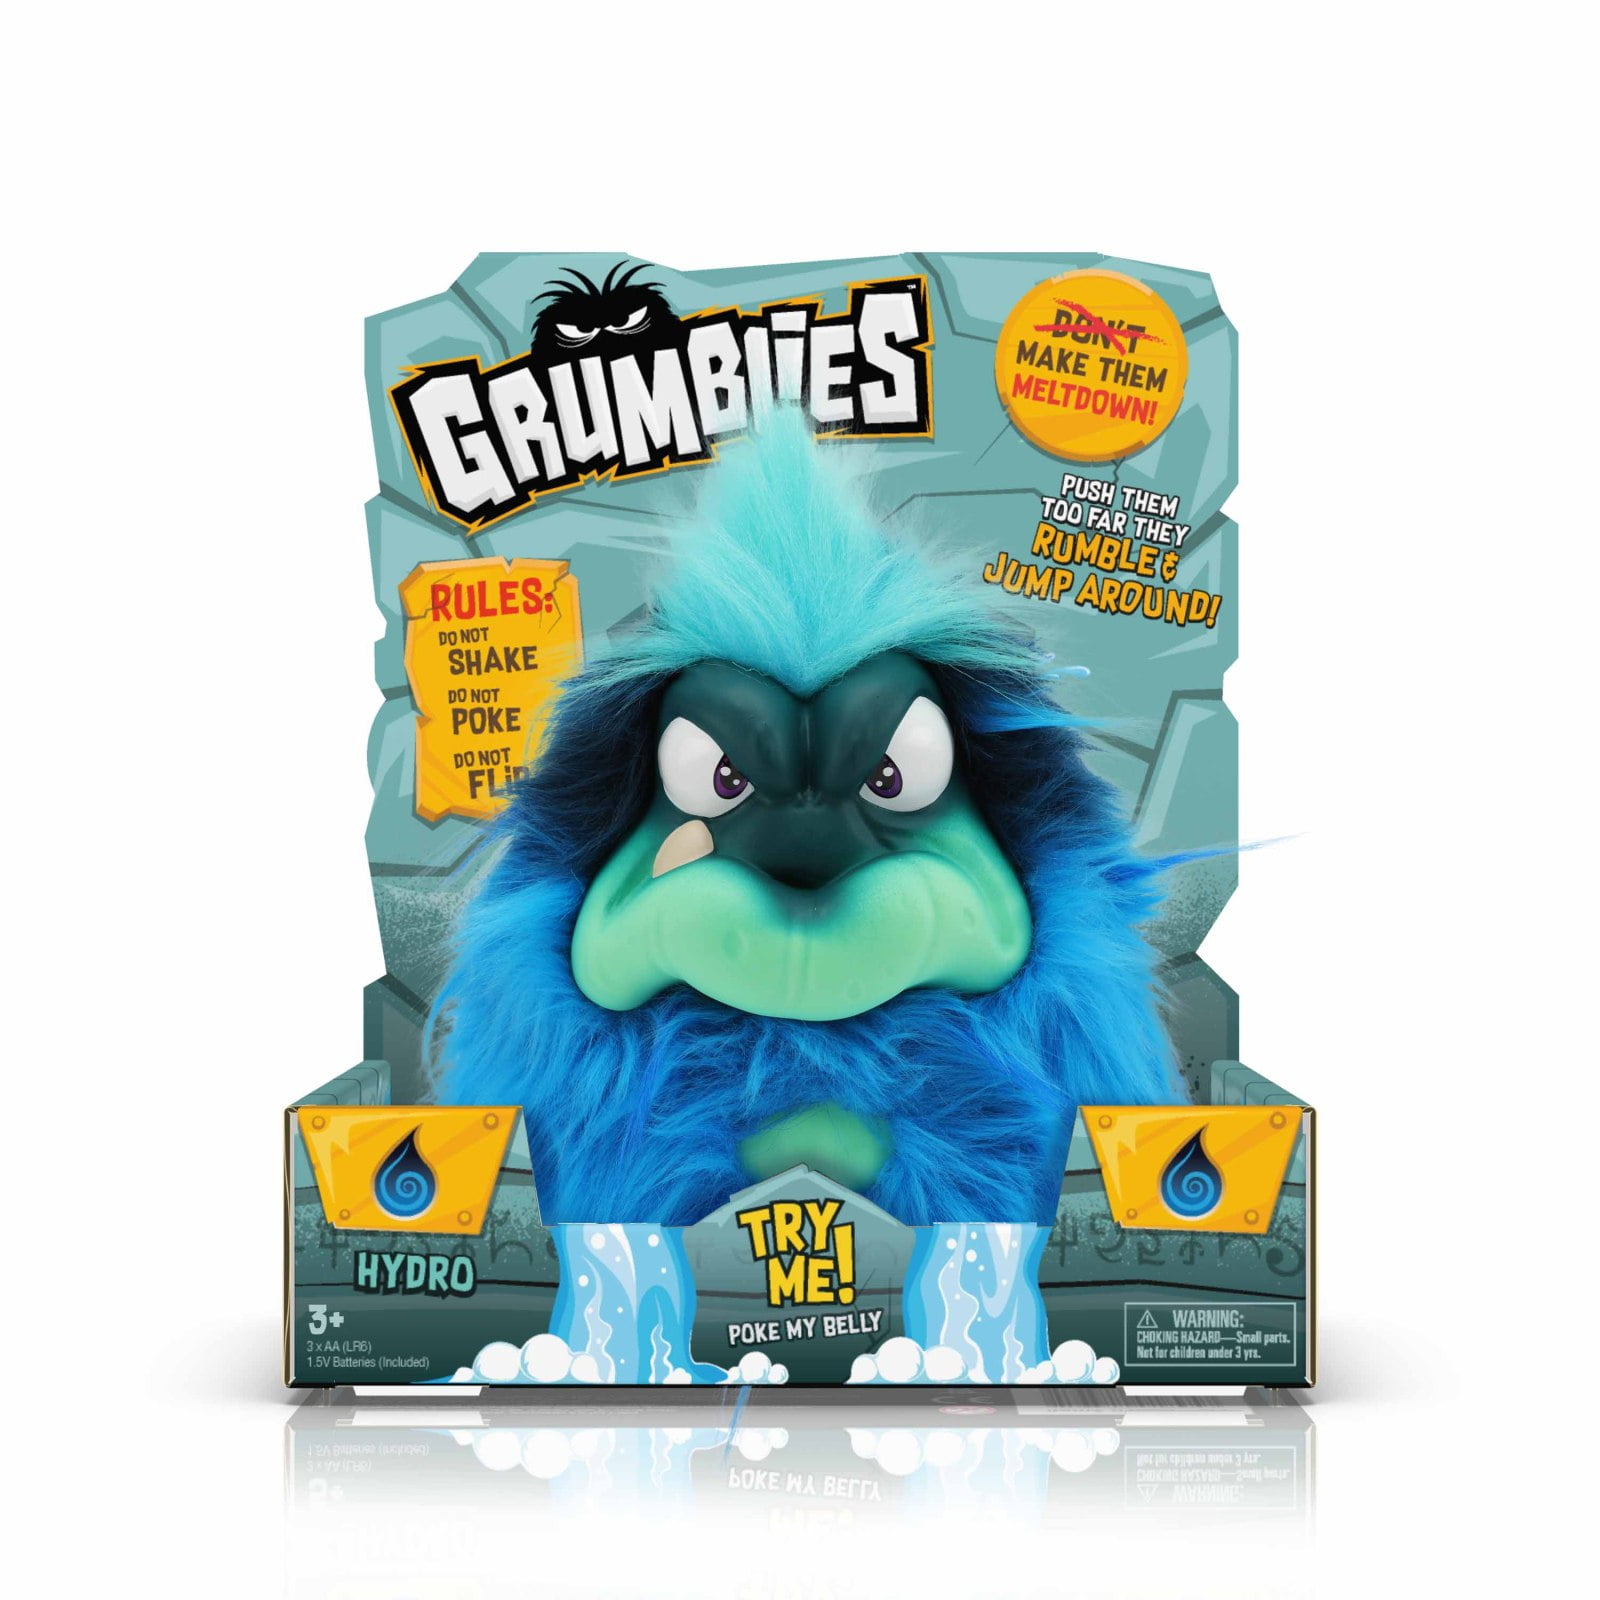 Grumblies Bolt Purple Pomsies Plush Interactive Kids Toy Boys Gift Set of 1 for sale online 